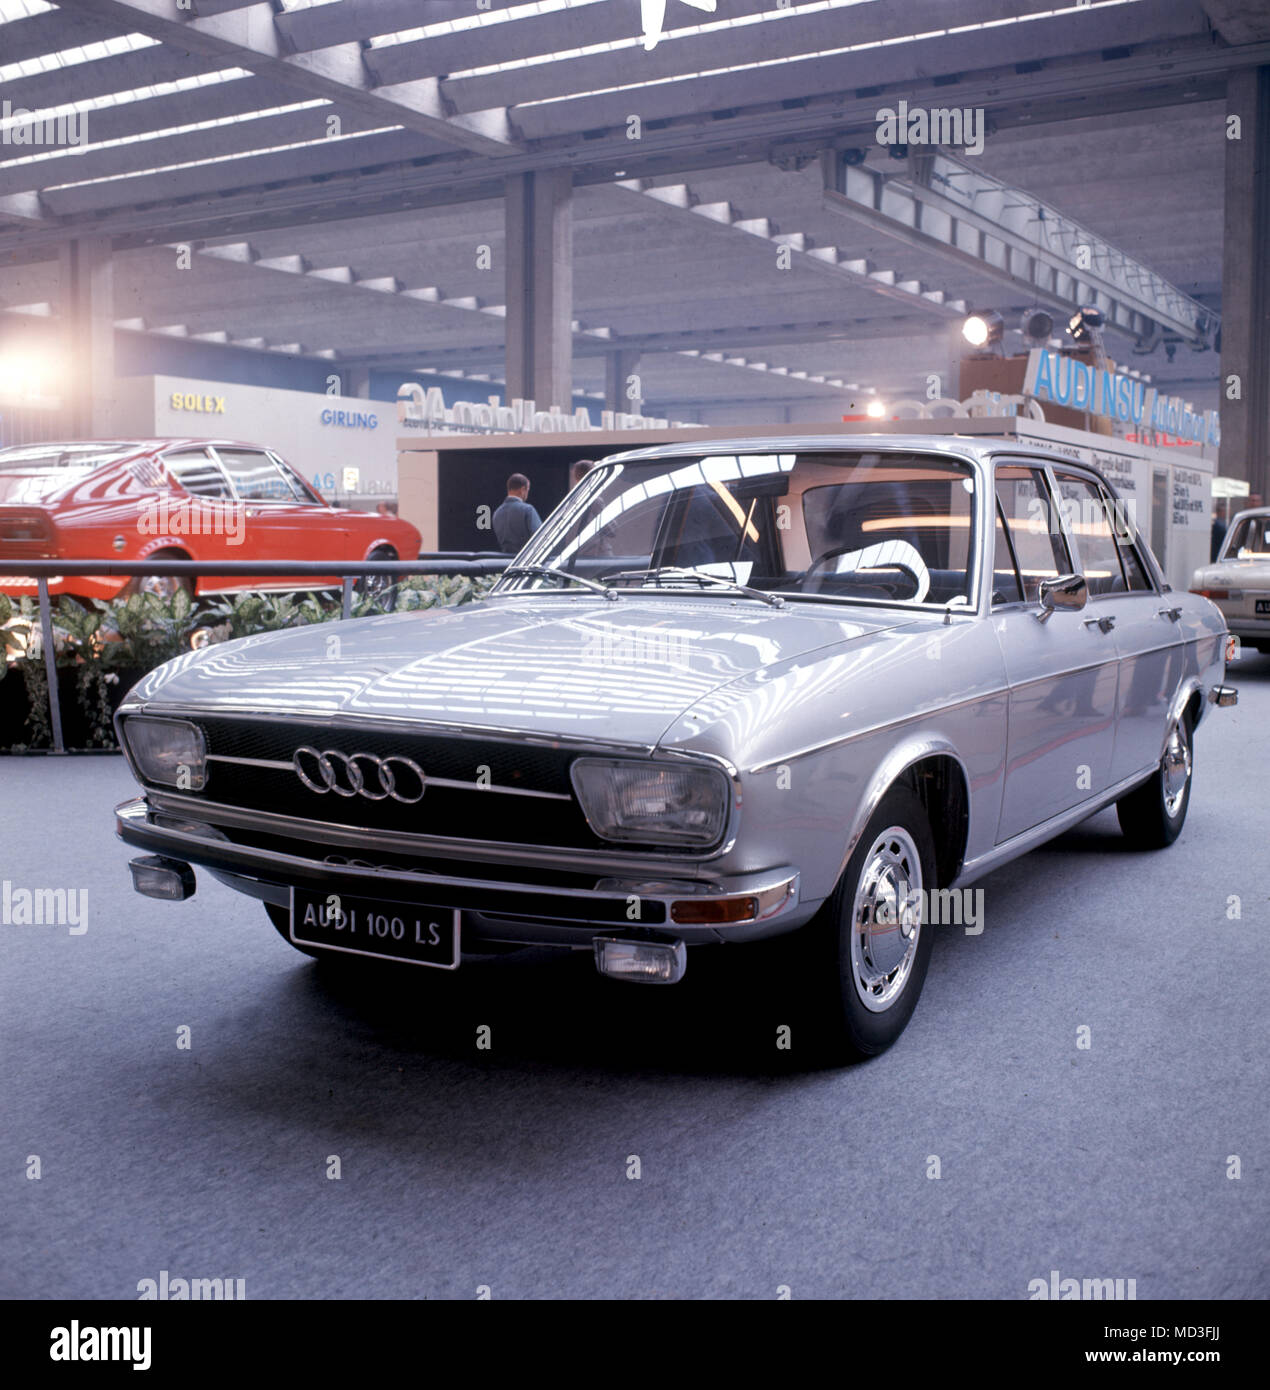 A car of the type Audi 100 LS, presented at the International Motor Show in Frankfurt am Main in 1969. Photo: Willi Gutberlet +++ (c) dpa - Report +++ | usage worldwide Stock Photo